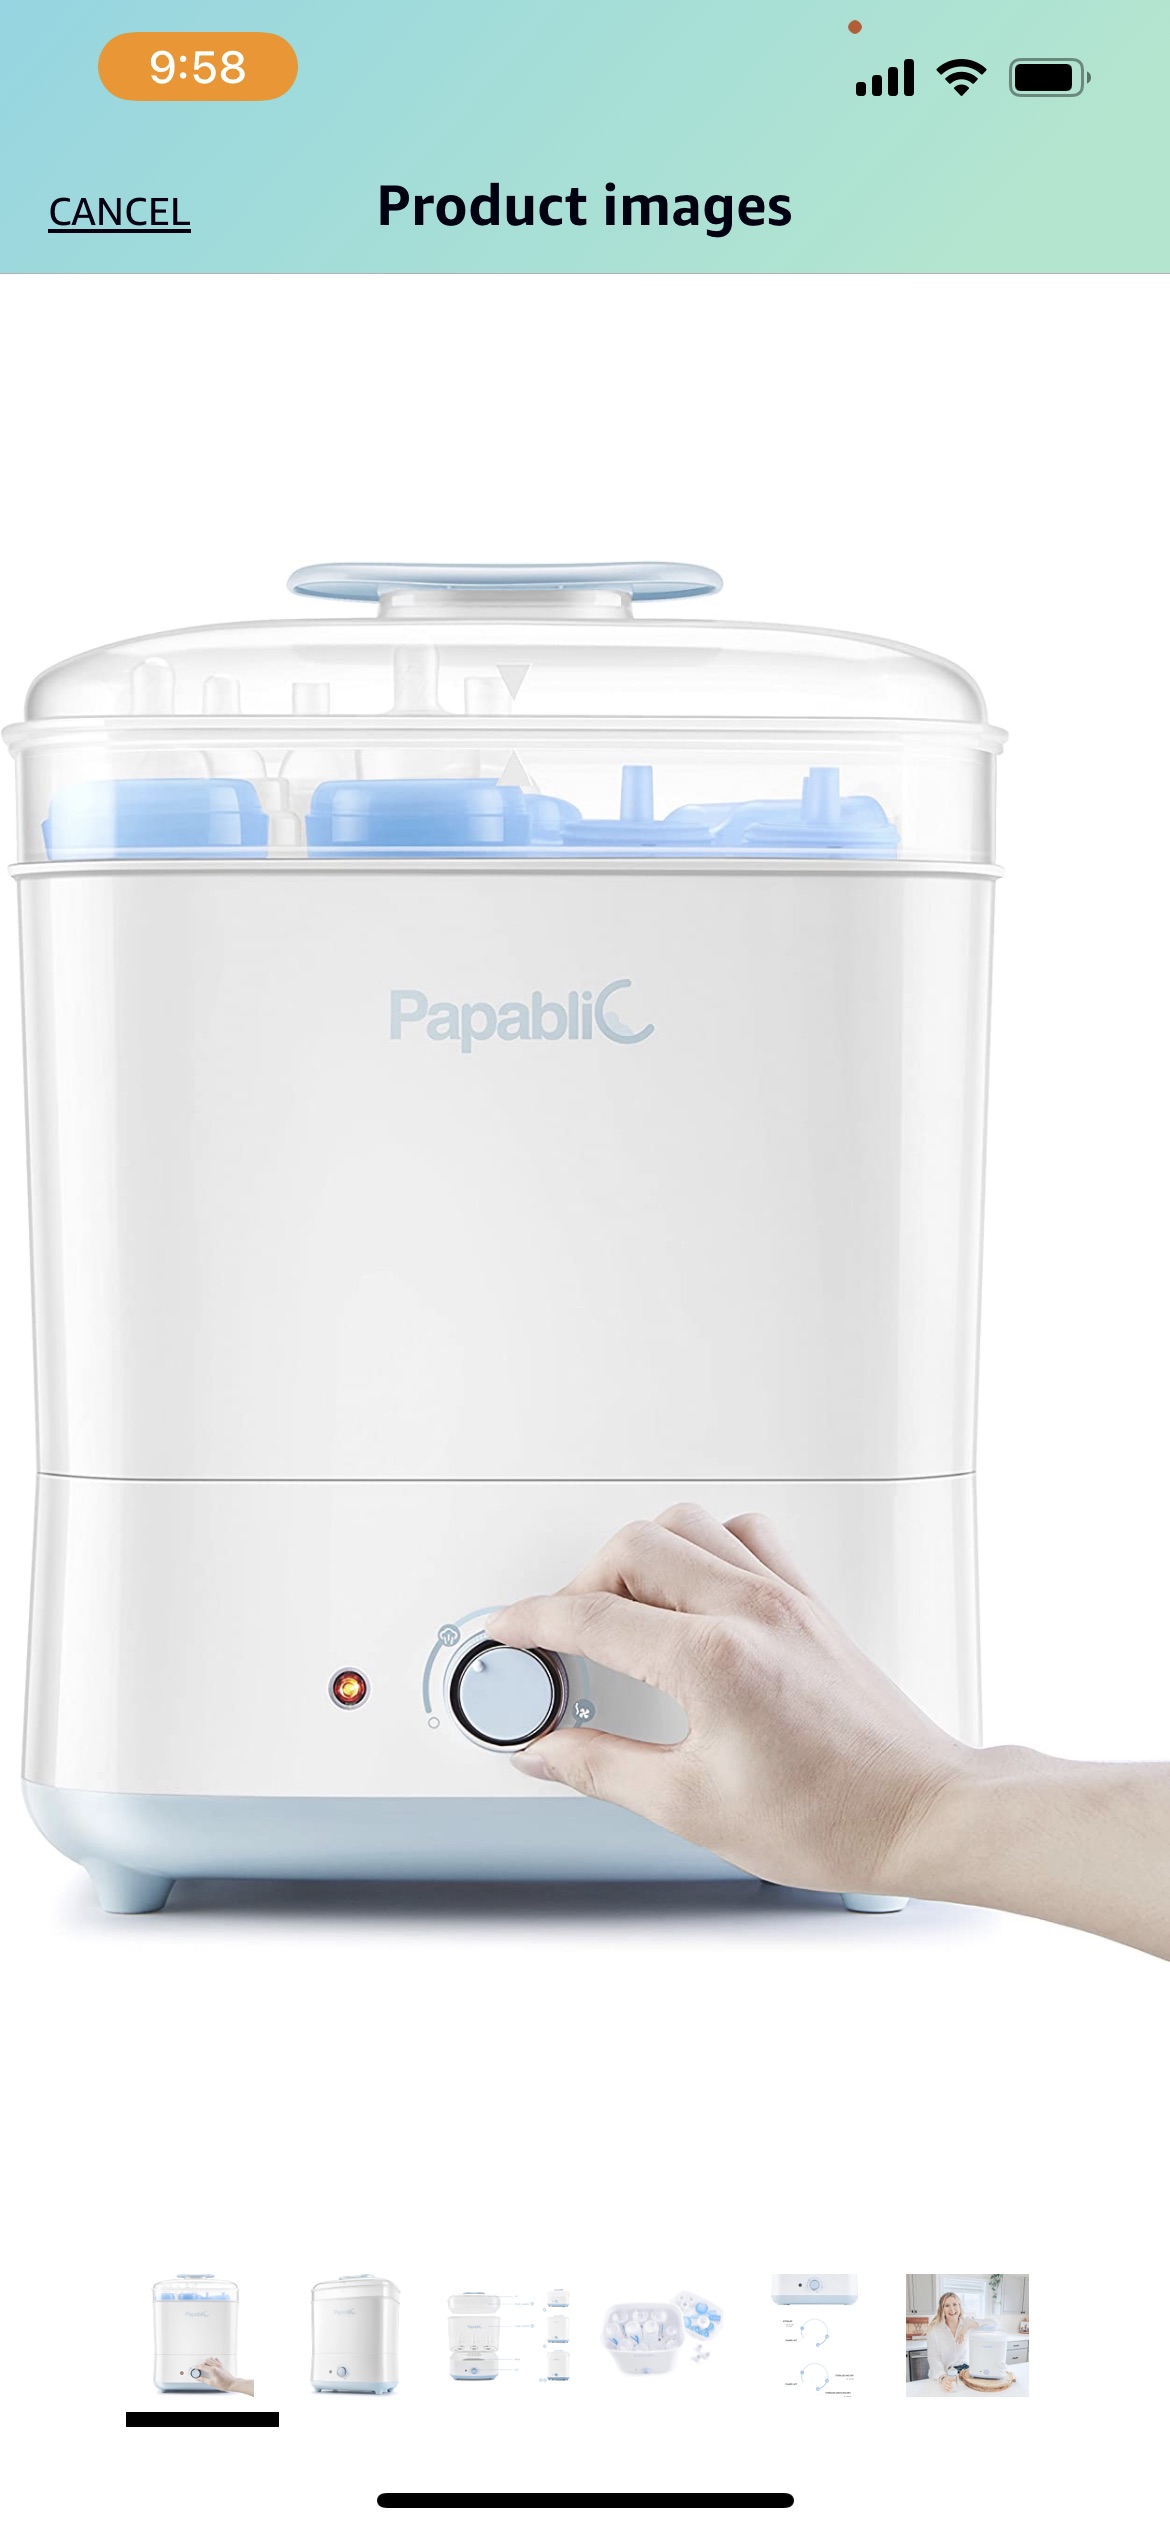 Amazon.com: Papablic Baby Bottle Electric Steam Sterilizer and Dryer : Baby